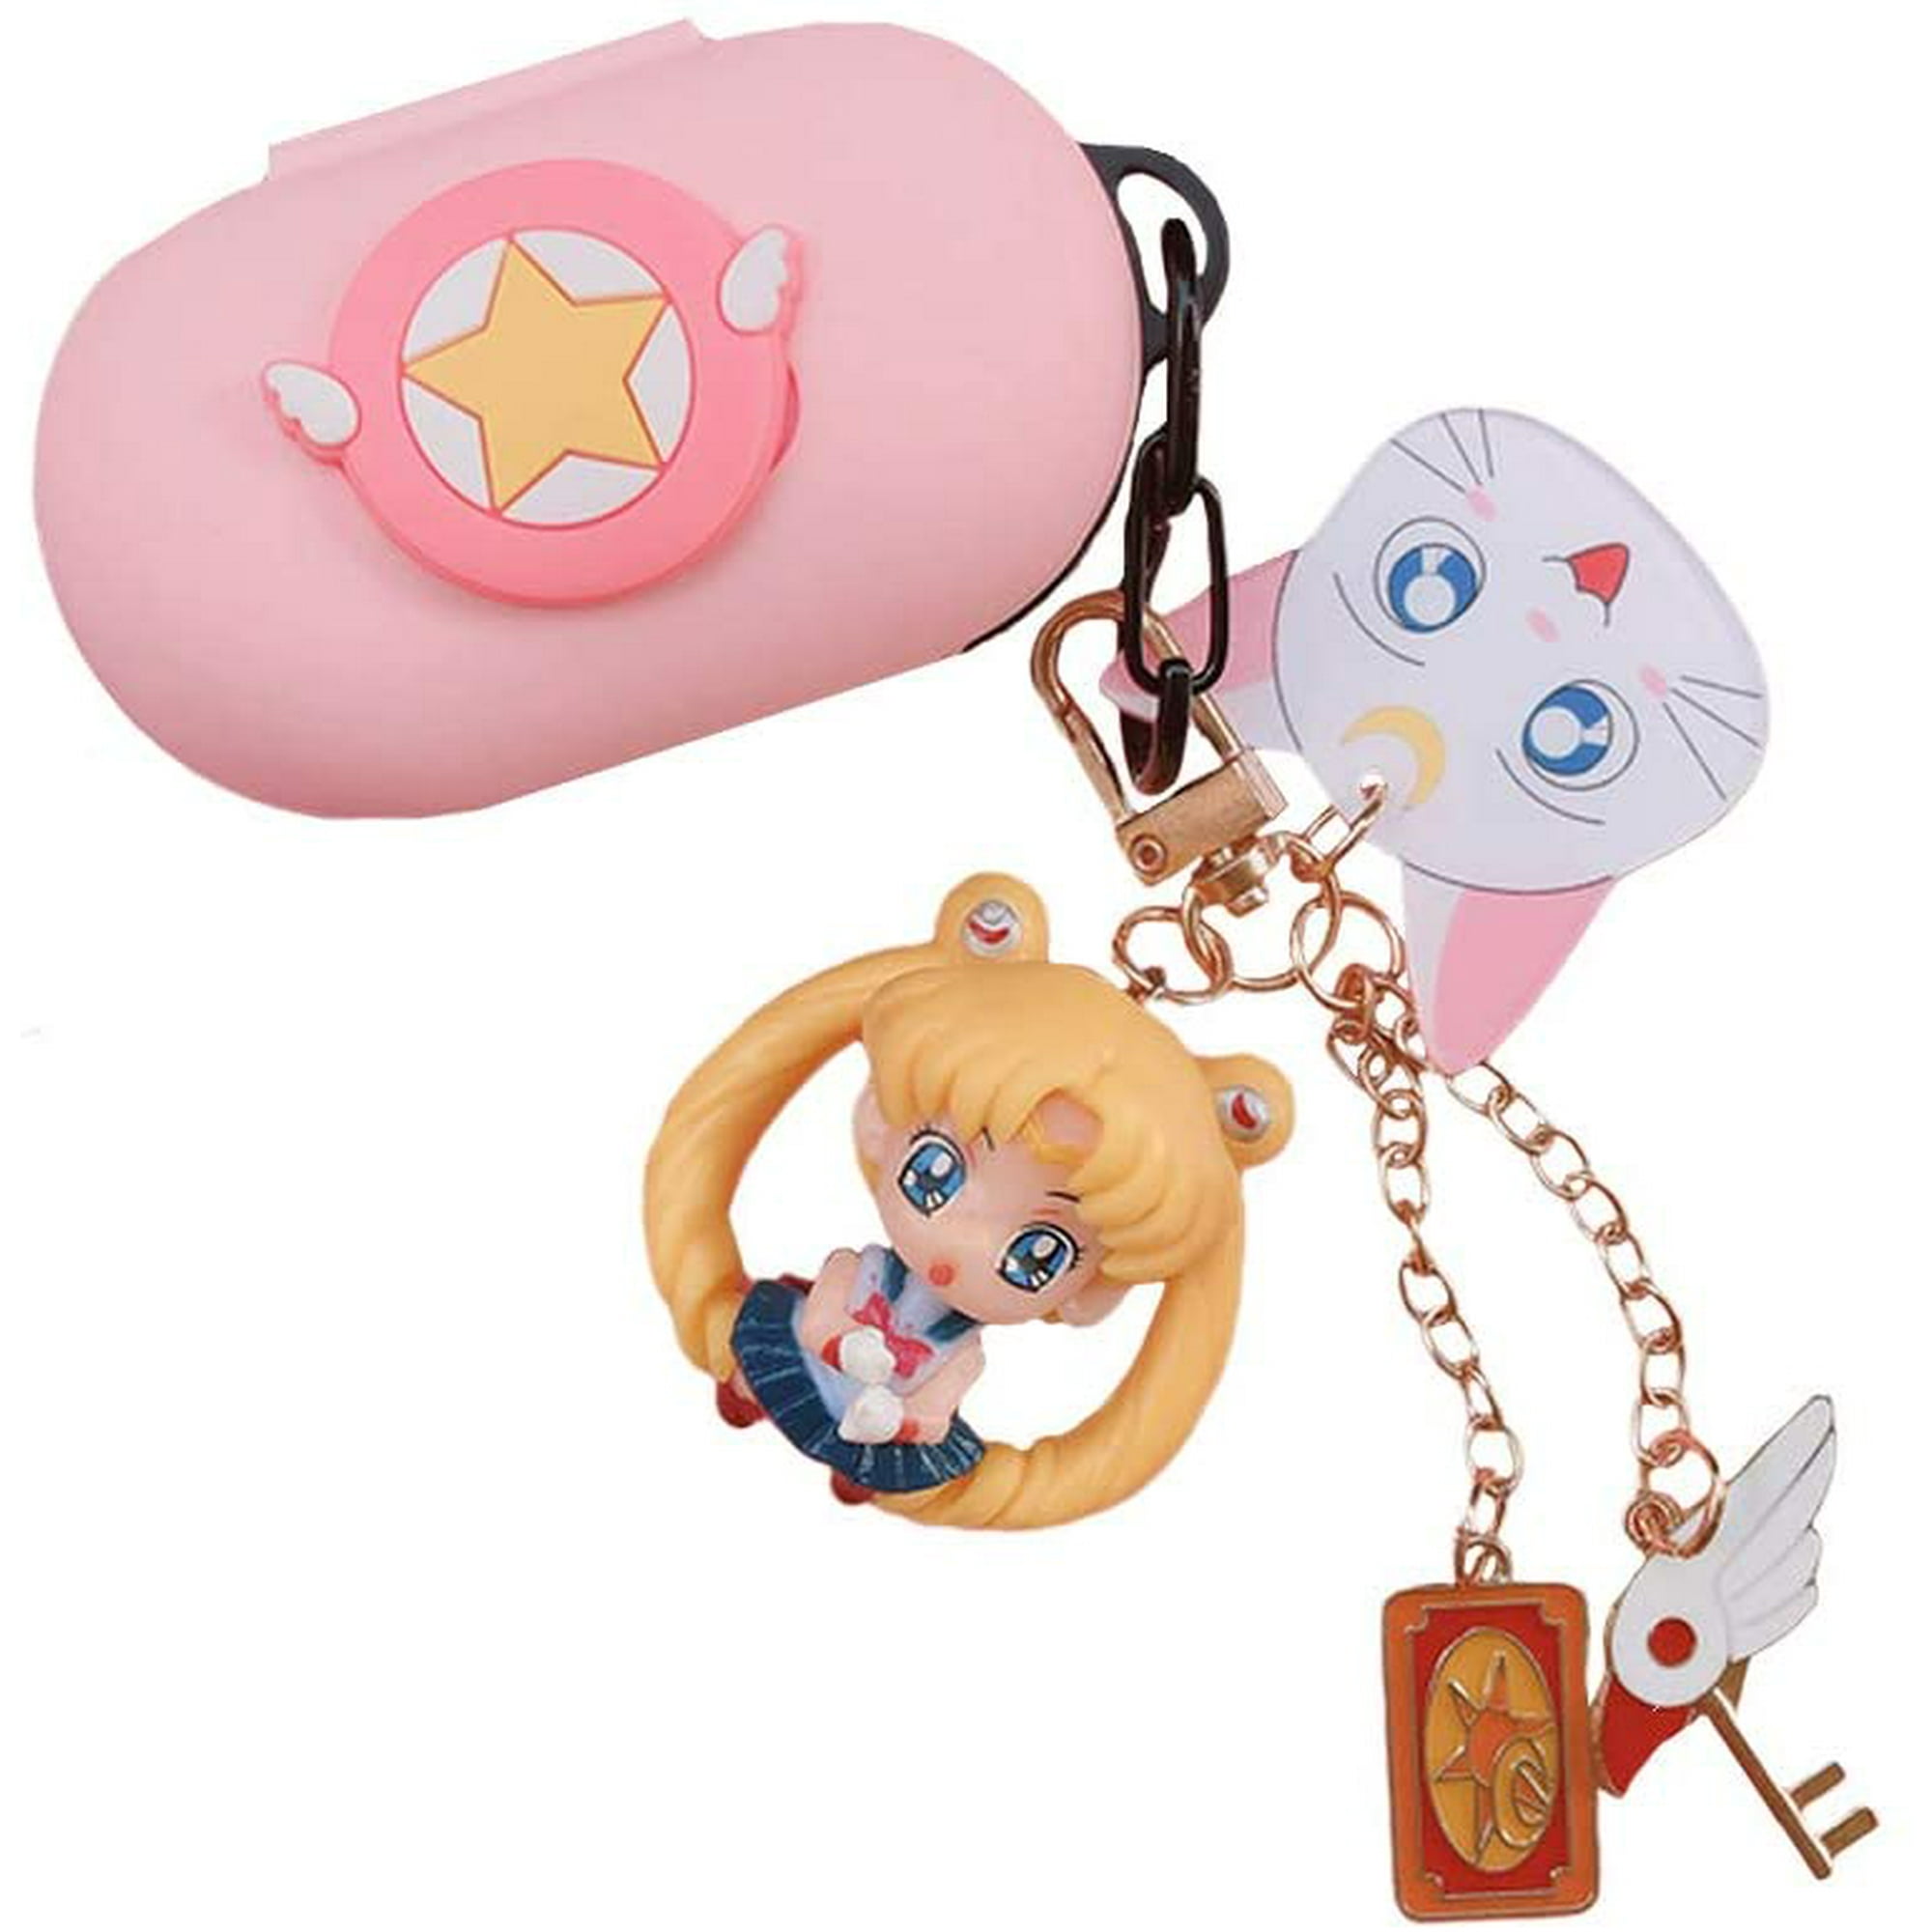 Case Cover for Galaxy Buds/Buds+ Plus, Kpurple Cartoon Sailor Moon Soft  Silicone Protective Compatible with Samsung | Walmart Canada